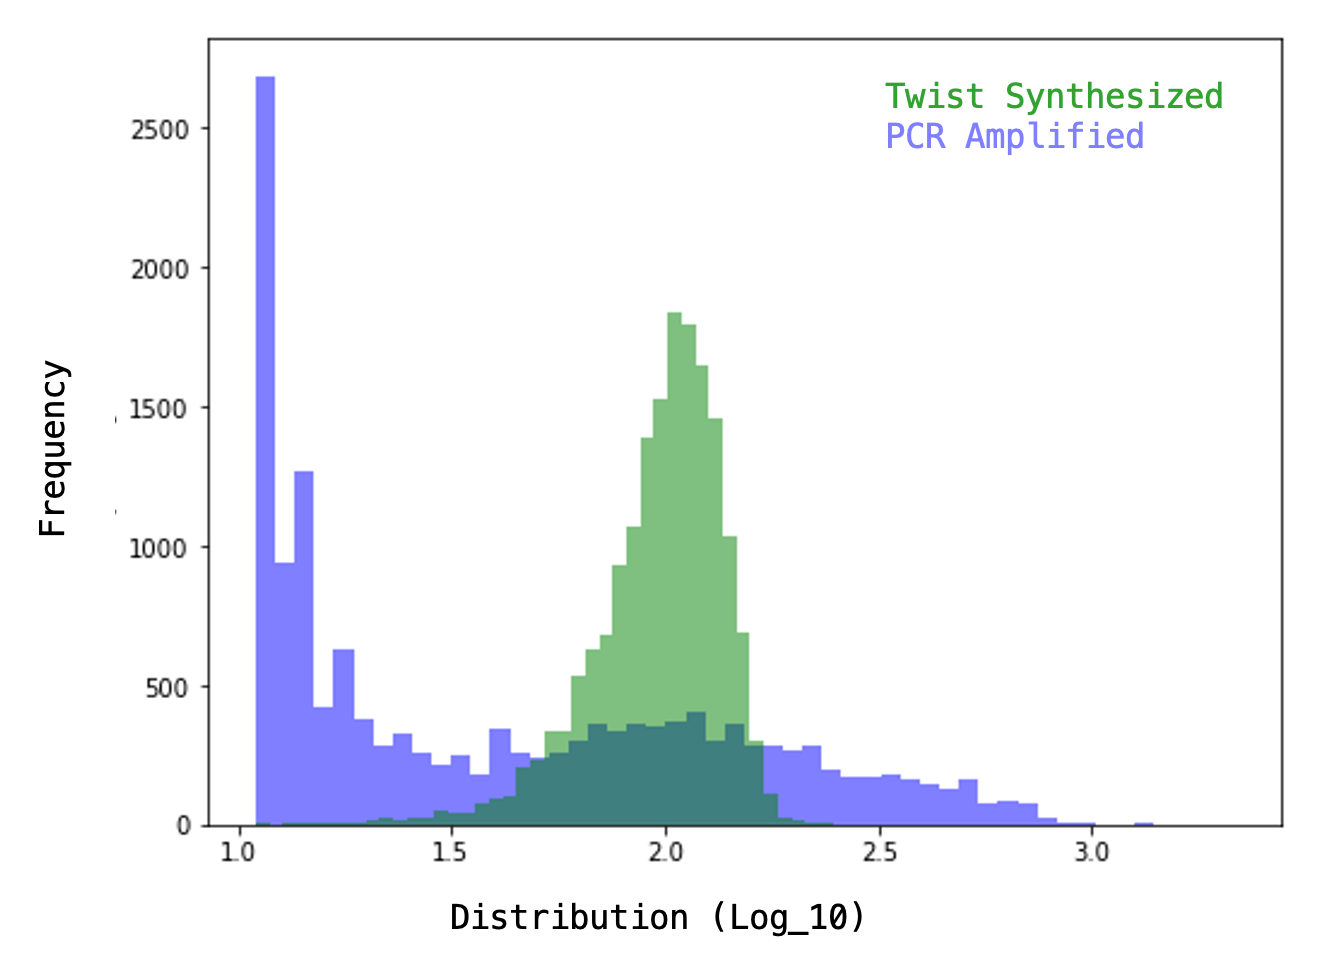 Distribution curve showing superior uniformity for the DNA library synthesized by Twist compared to a library prepared by PCR amplification.